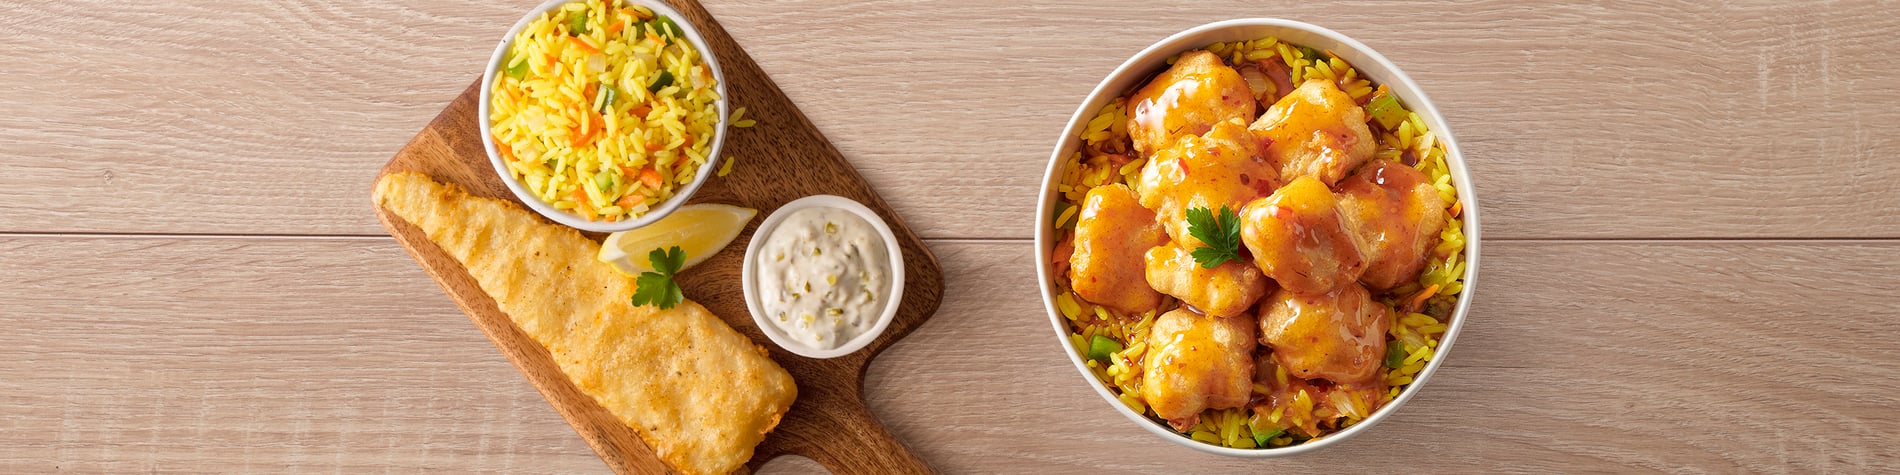 Seafood specials from Fishaways – the Hake and Rice meal for only R39.90, and the Spicy Hake Pot meal for only R49.90.